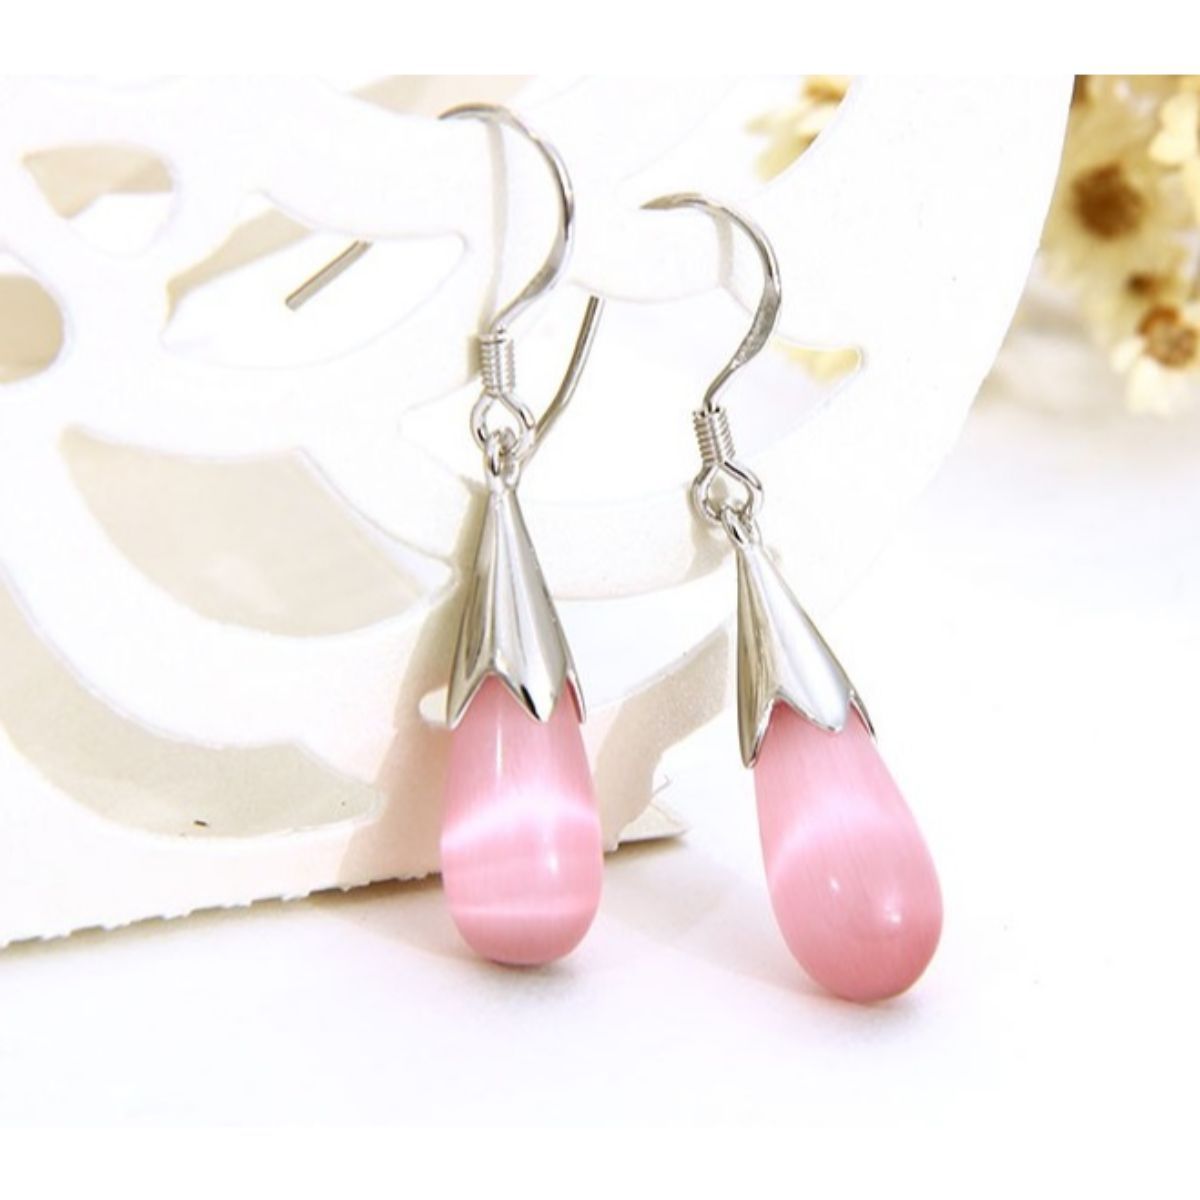 Flipkartcom  Buy Silver Shoppee Silver Shoppee Sterling Silver Earrings  for Baby Girls Girls and Women SSER1505 Pearl Sterling Silver Stud  Earring Online at Best Prices in India